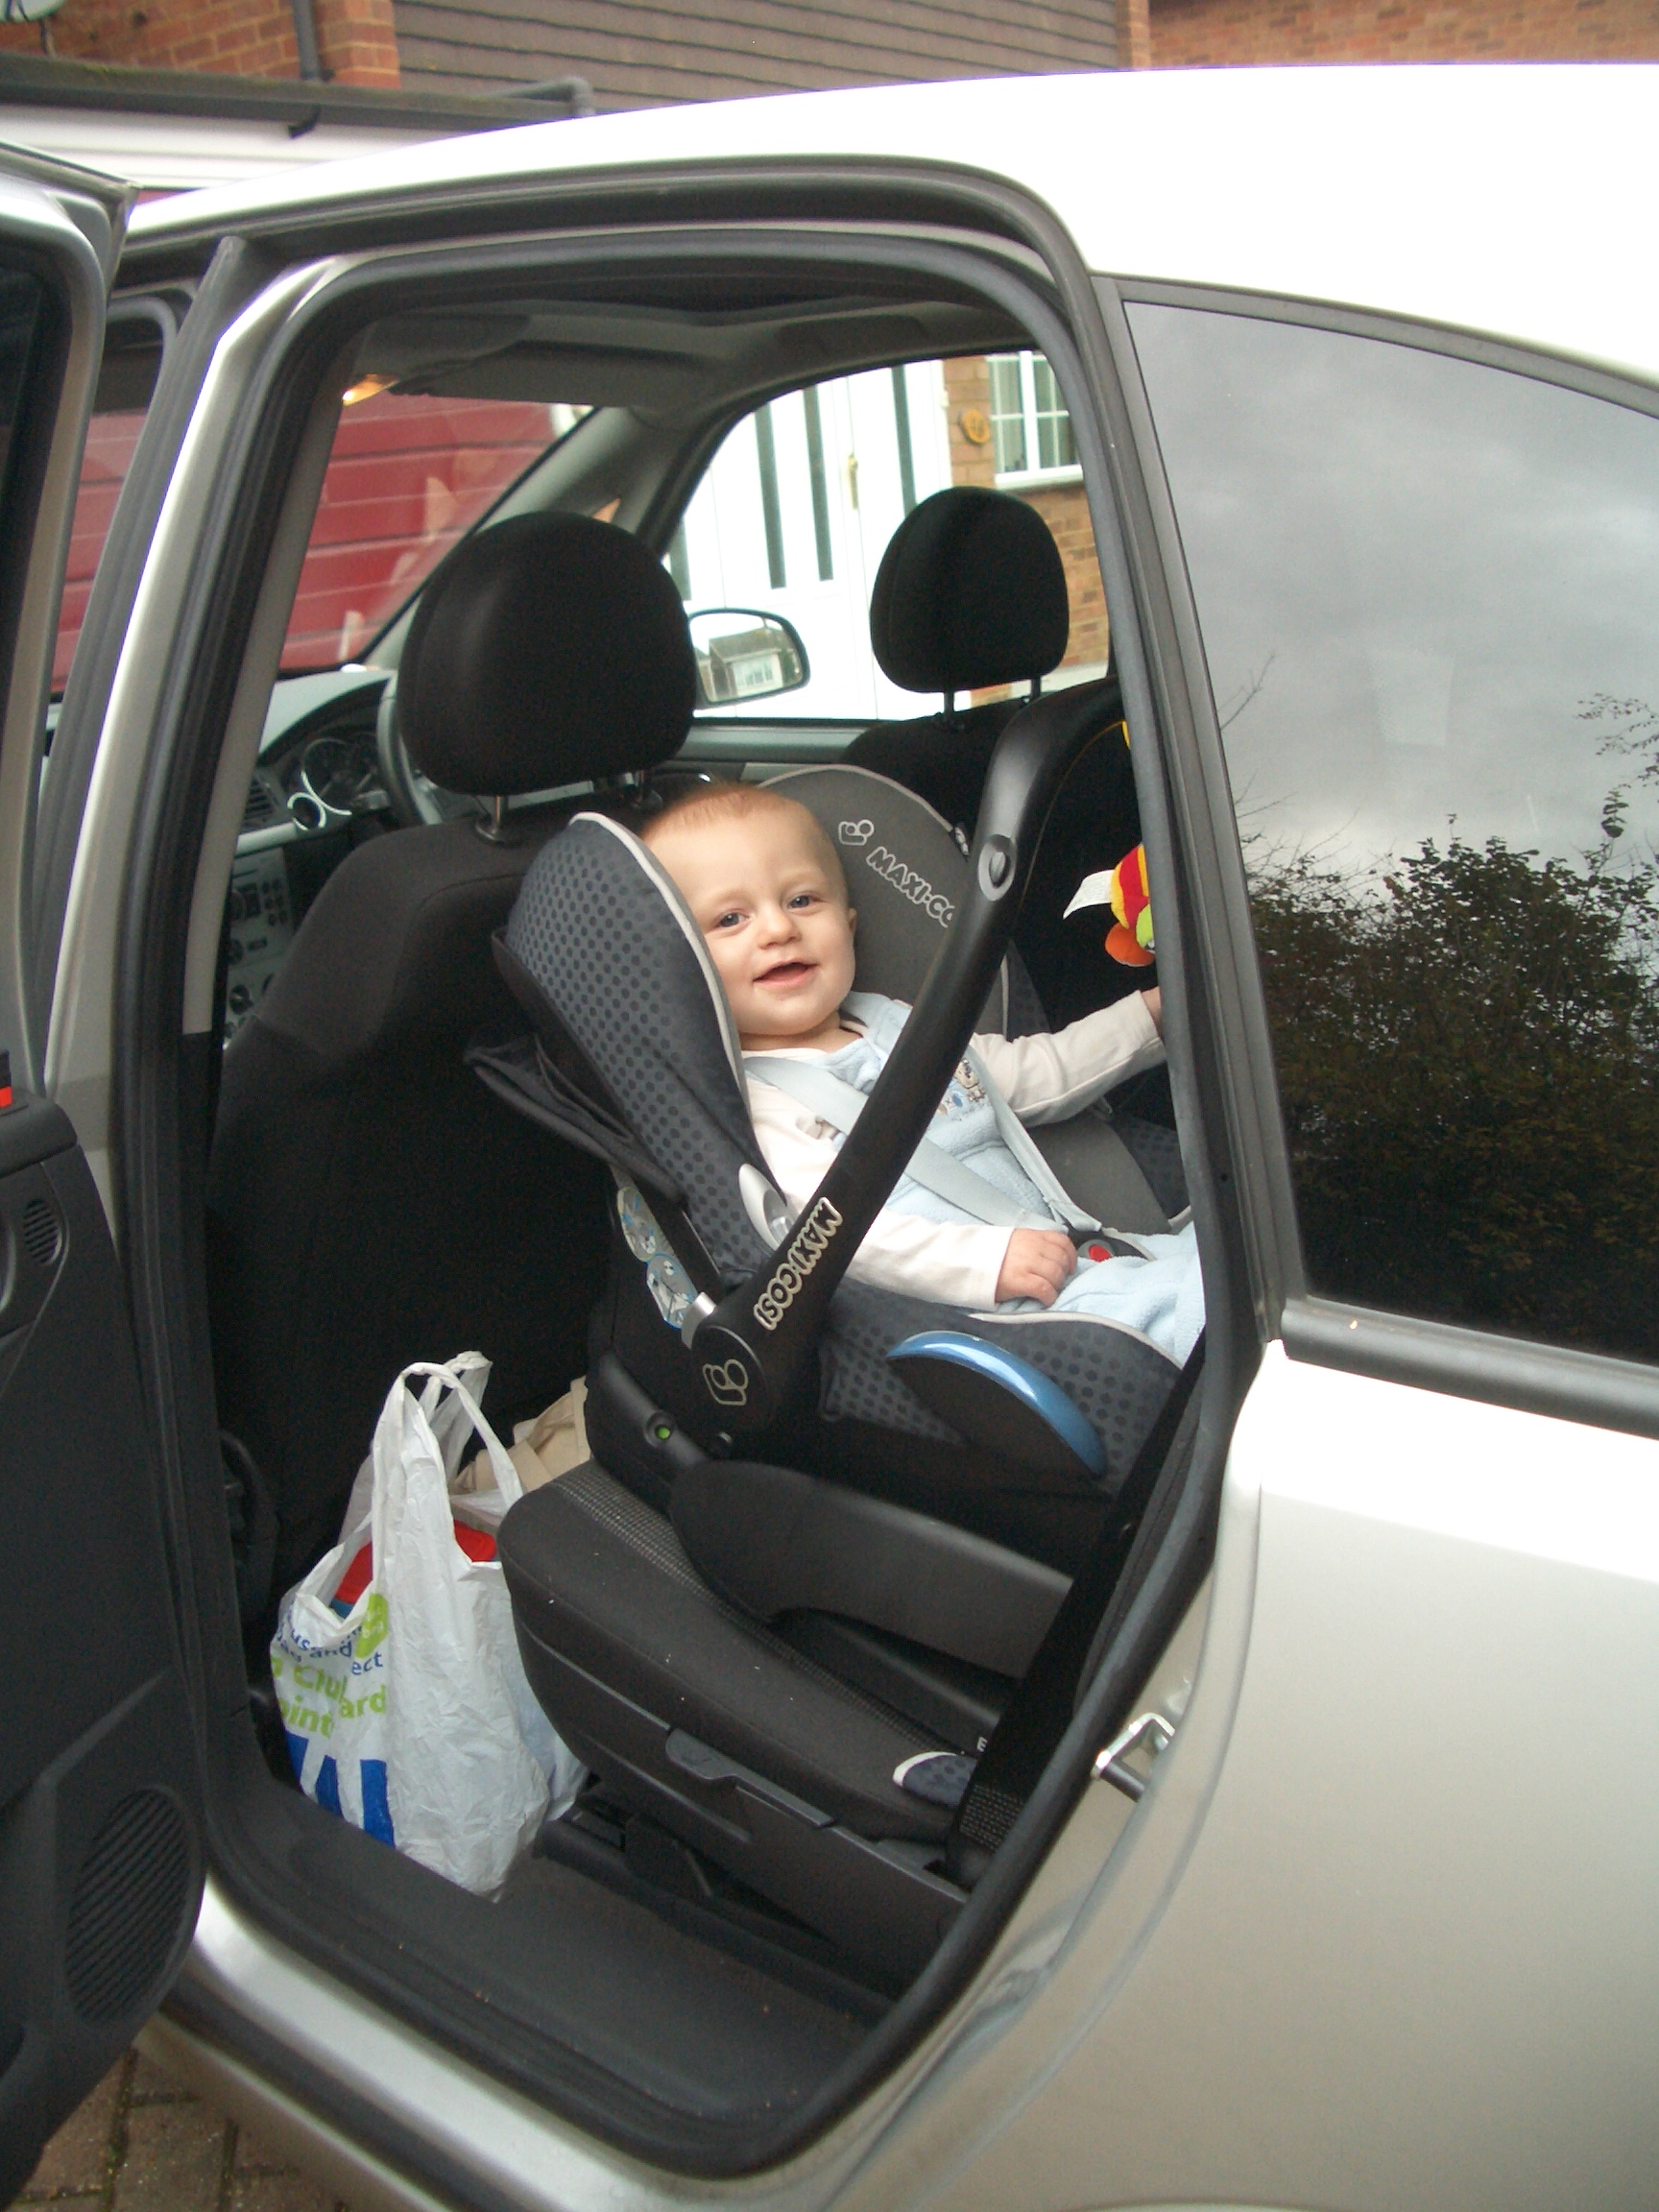 Rear facing baby seat in car with isofix